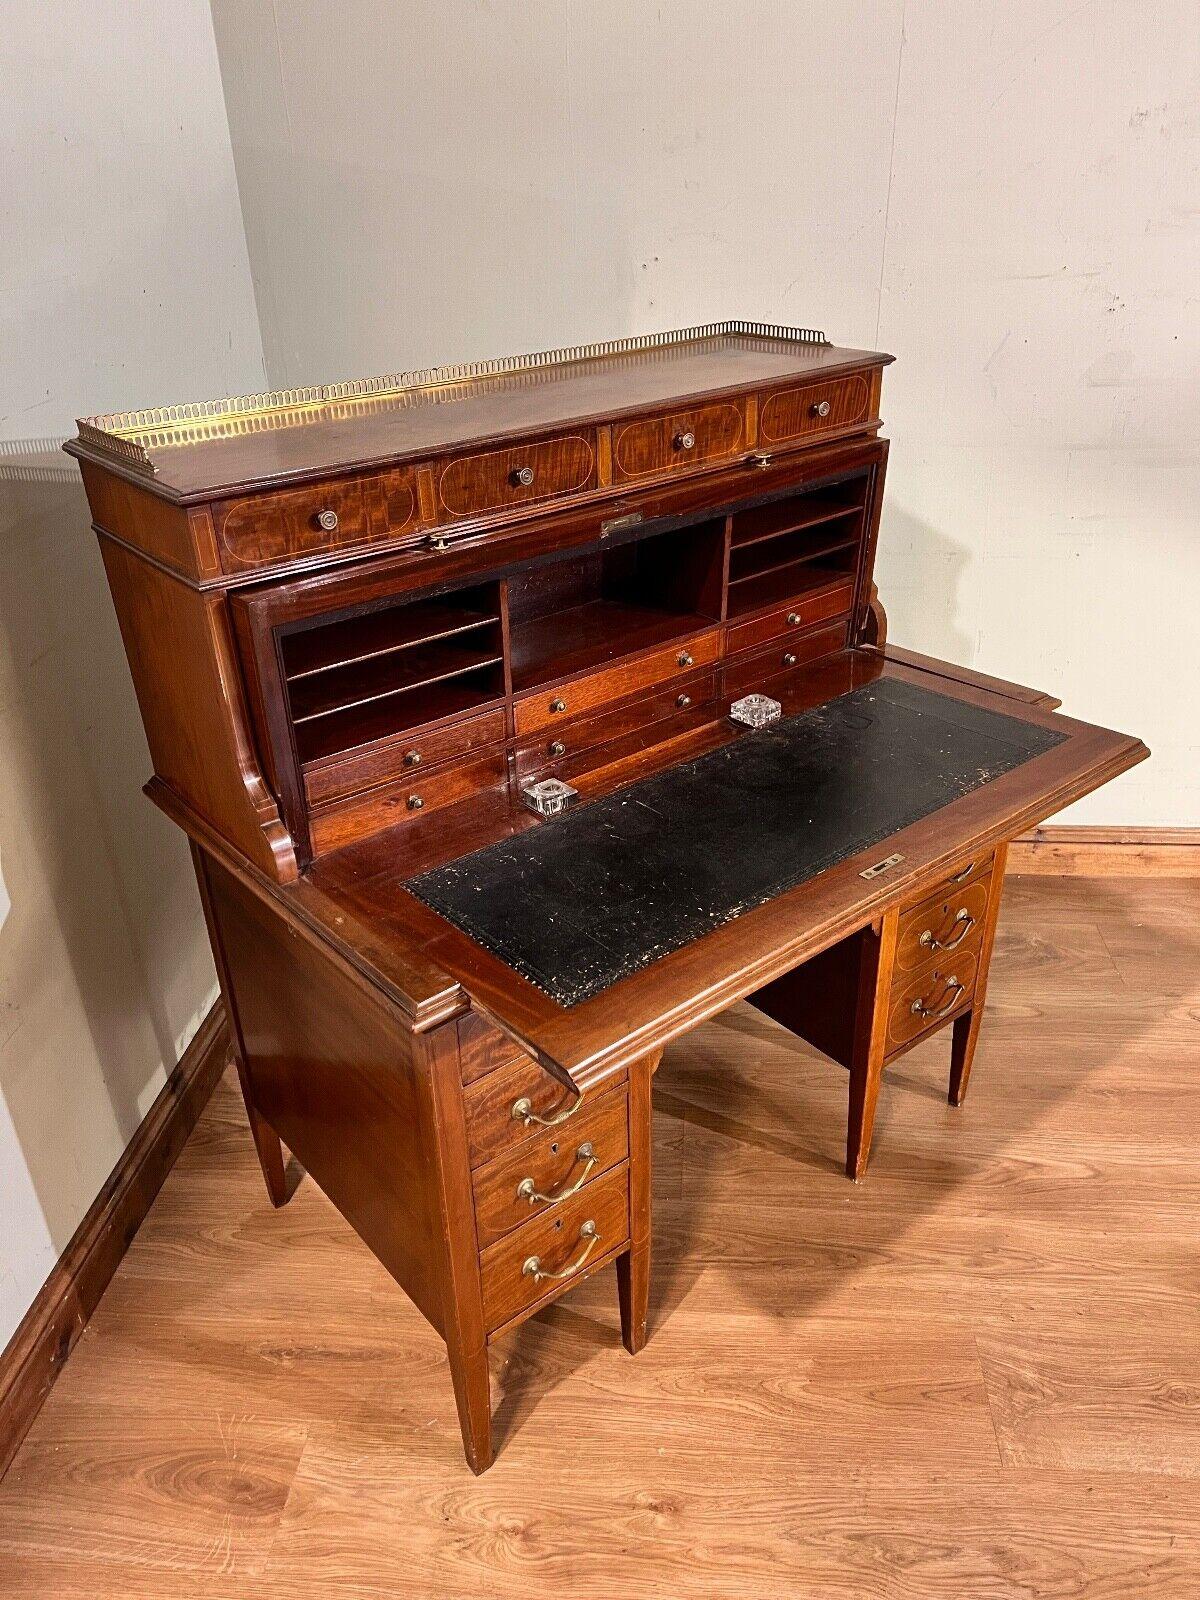 Sheraton Desk Mahogany Roll Top Writing Table Edwardian In Good Condition For Sale In Potters Bar, GB